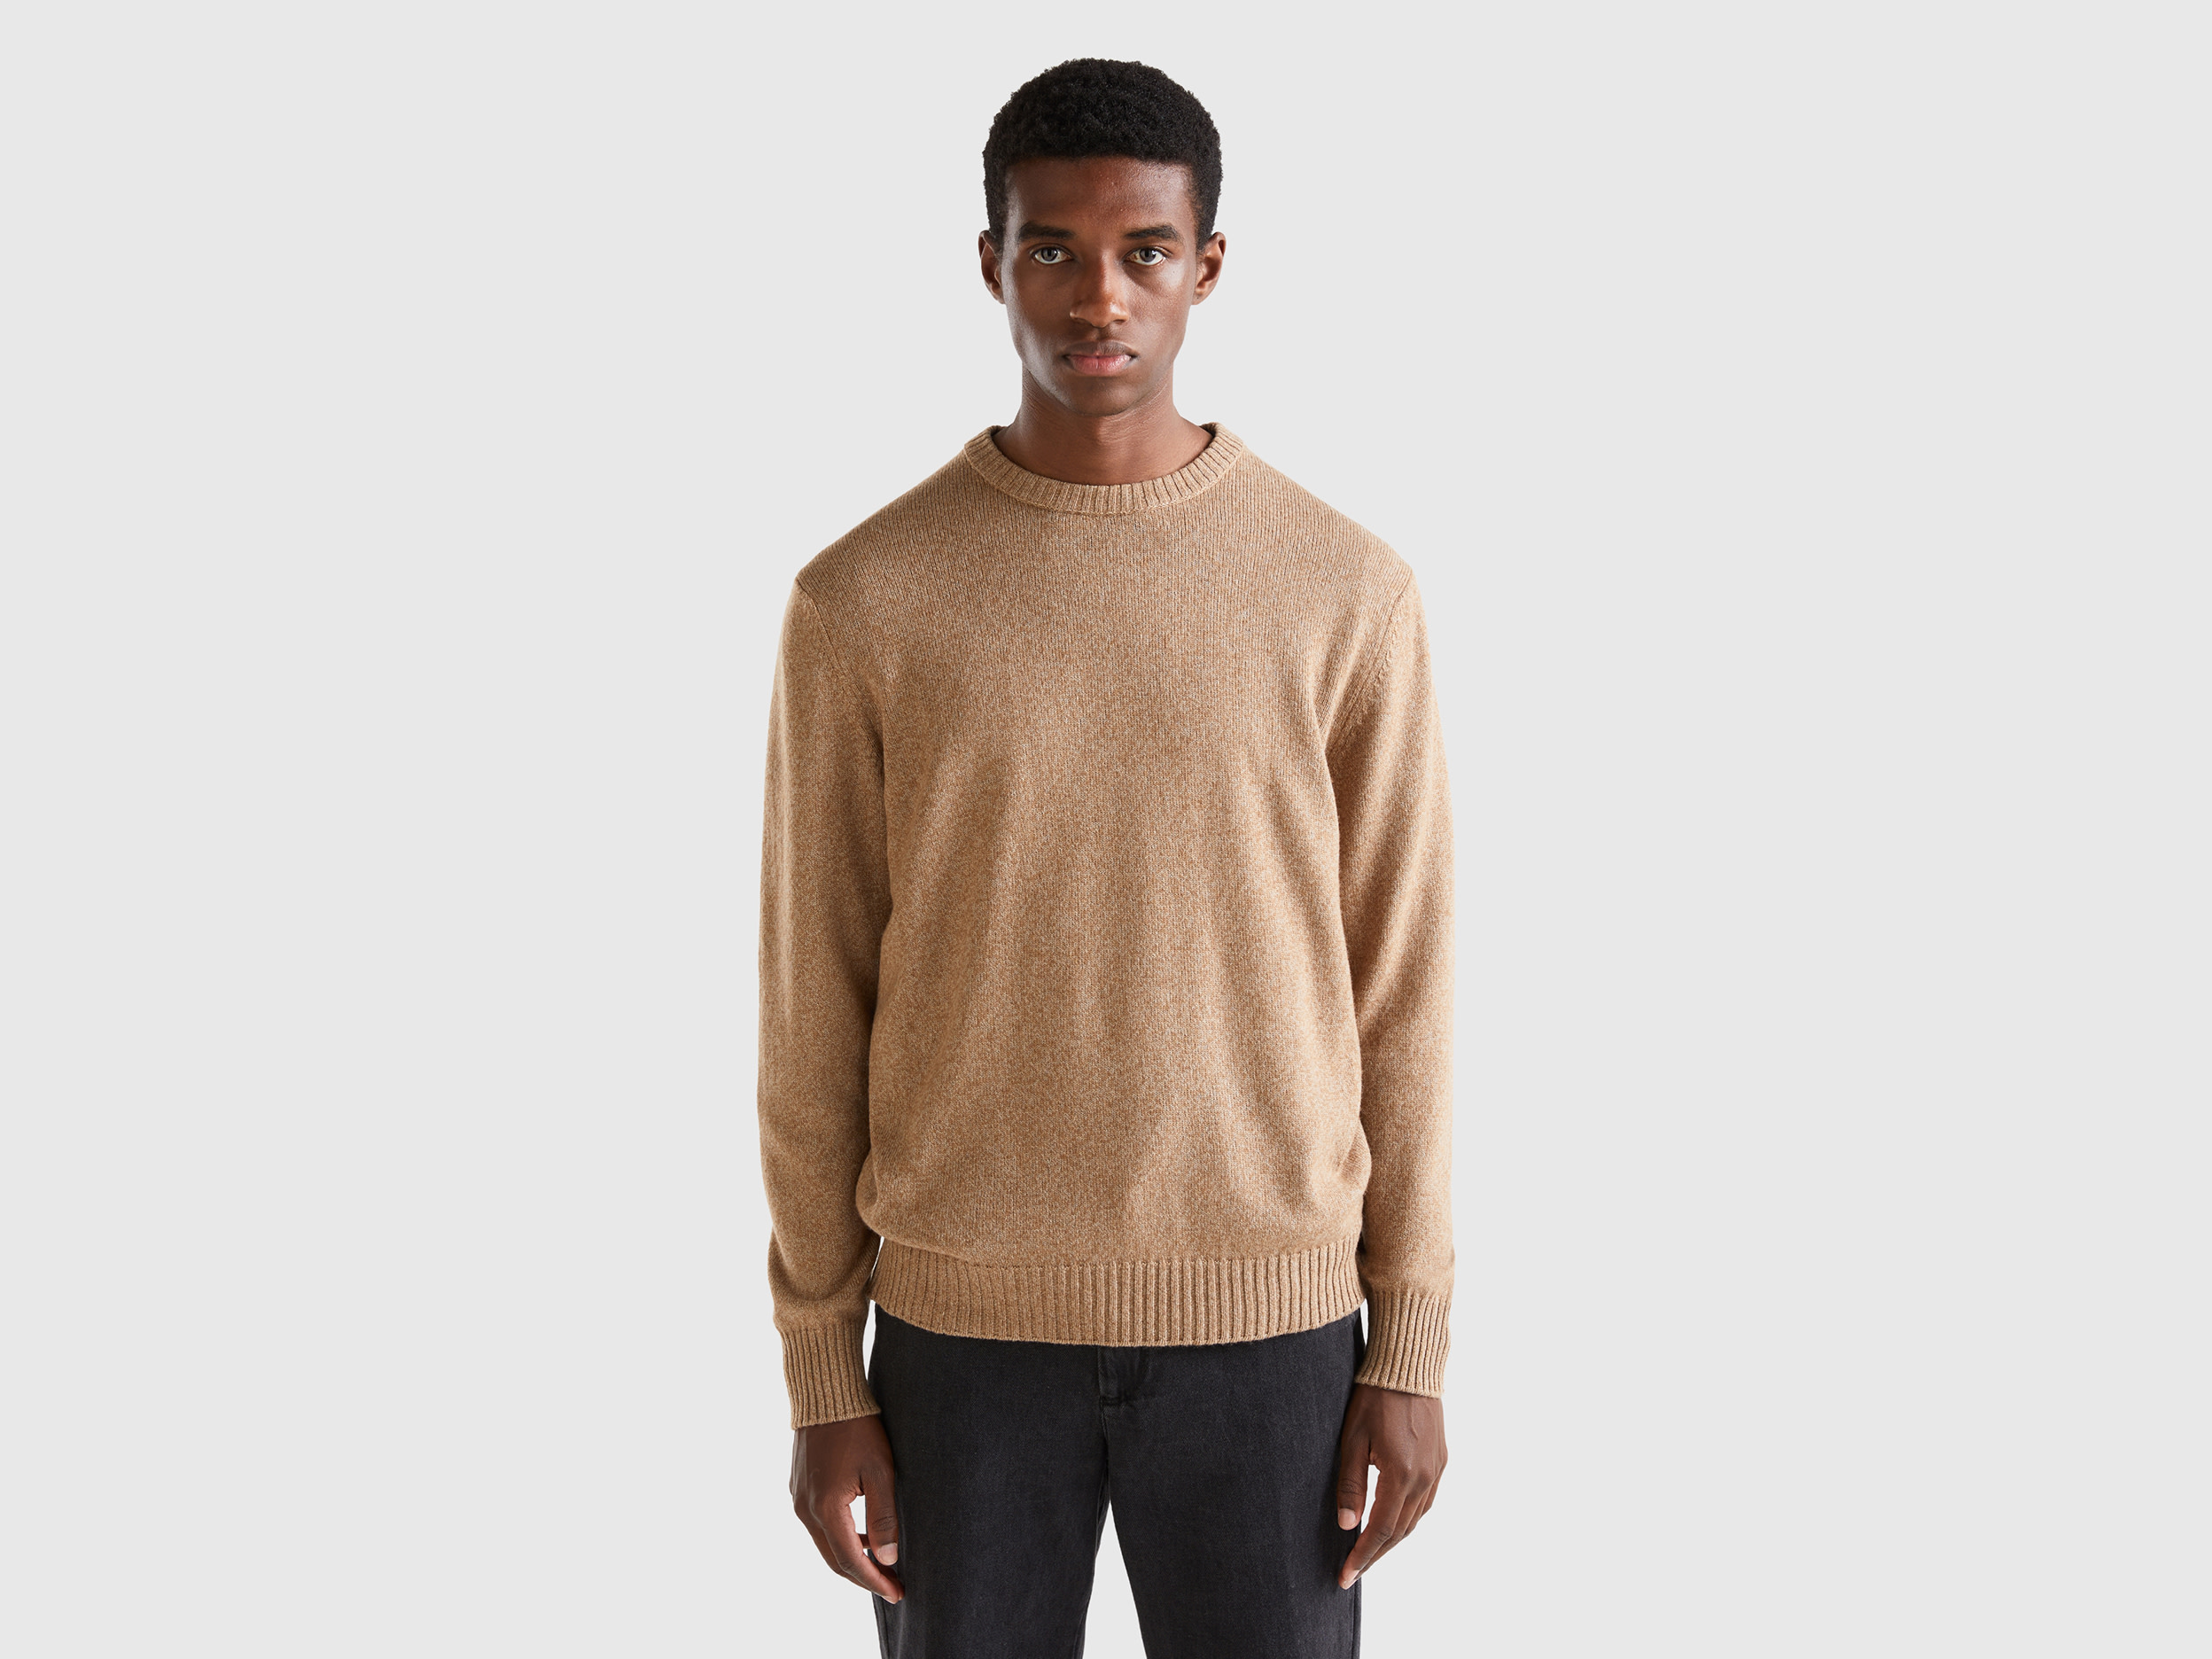 Benetton, Crew Neck Sweater In Cashmere And Wool Blend, size XL, Beige, Men